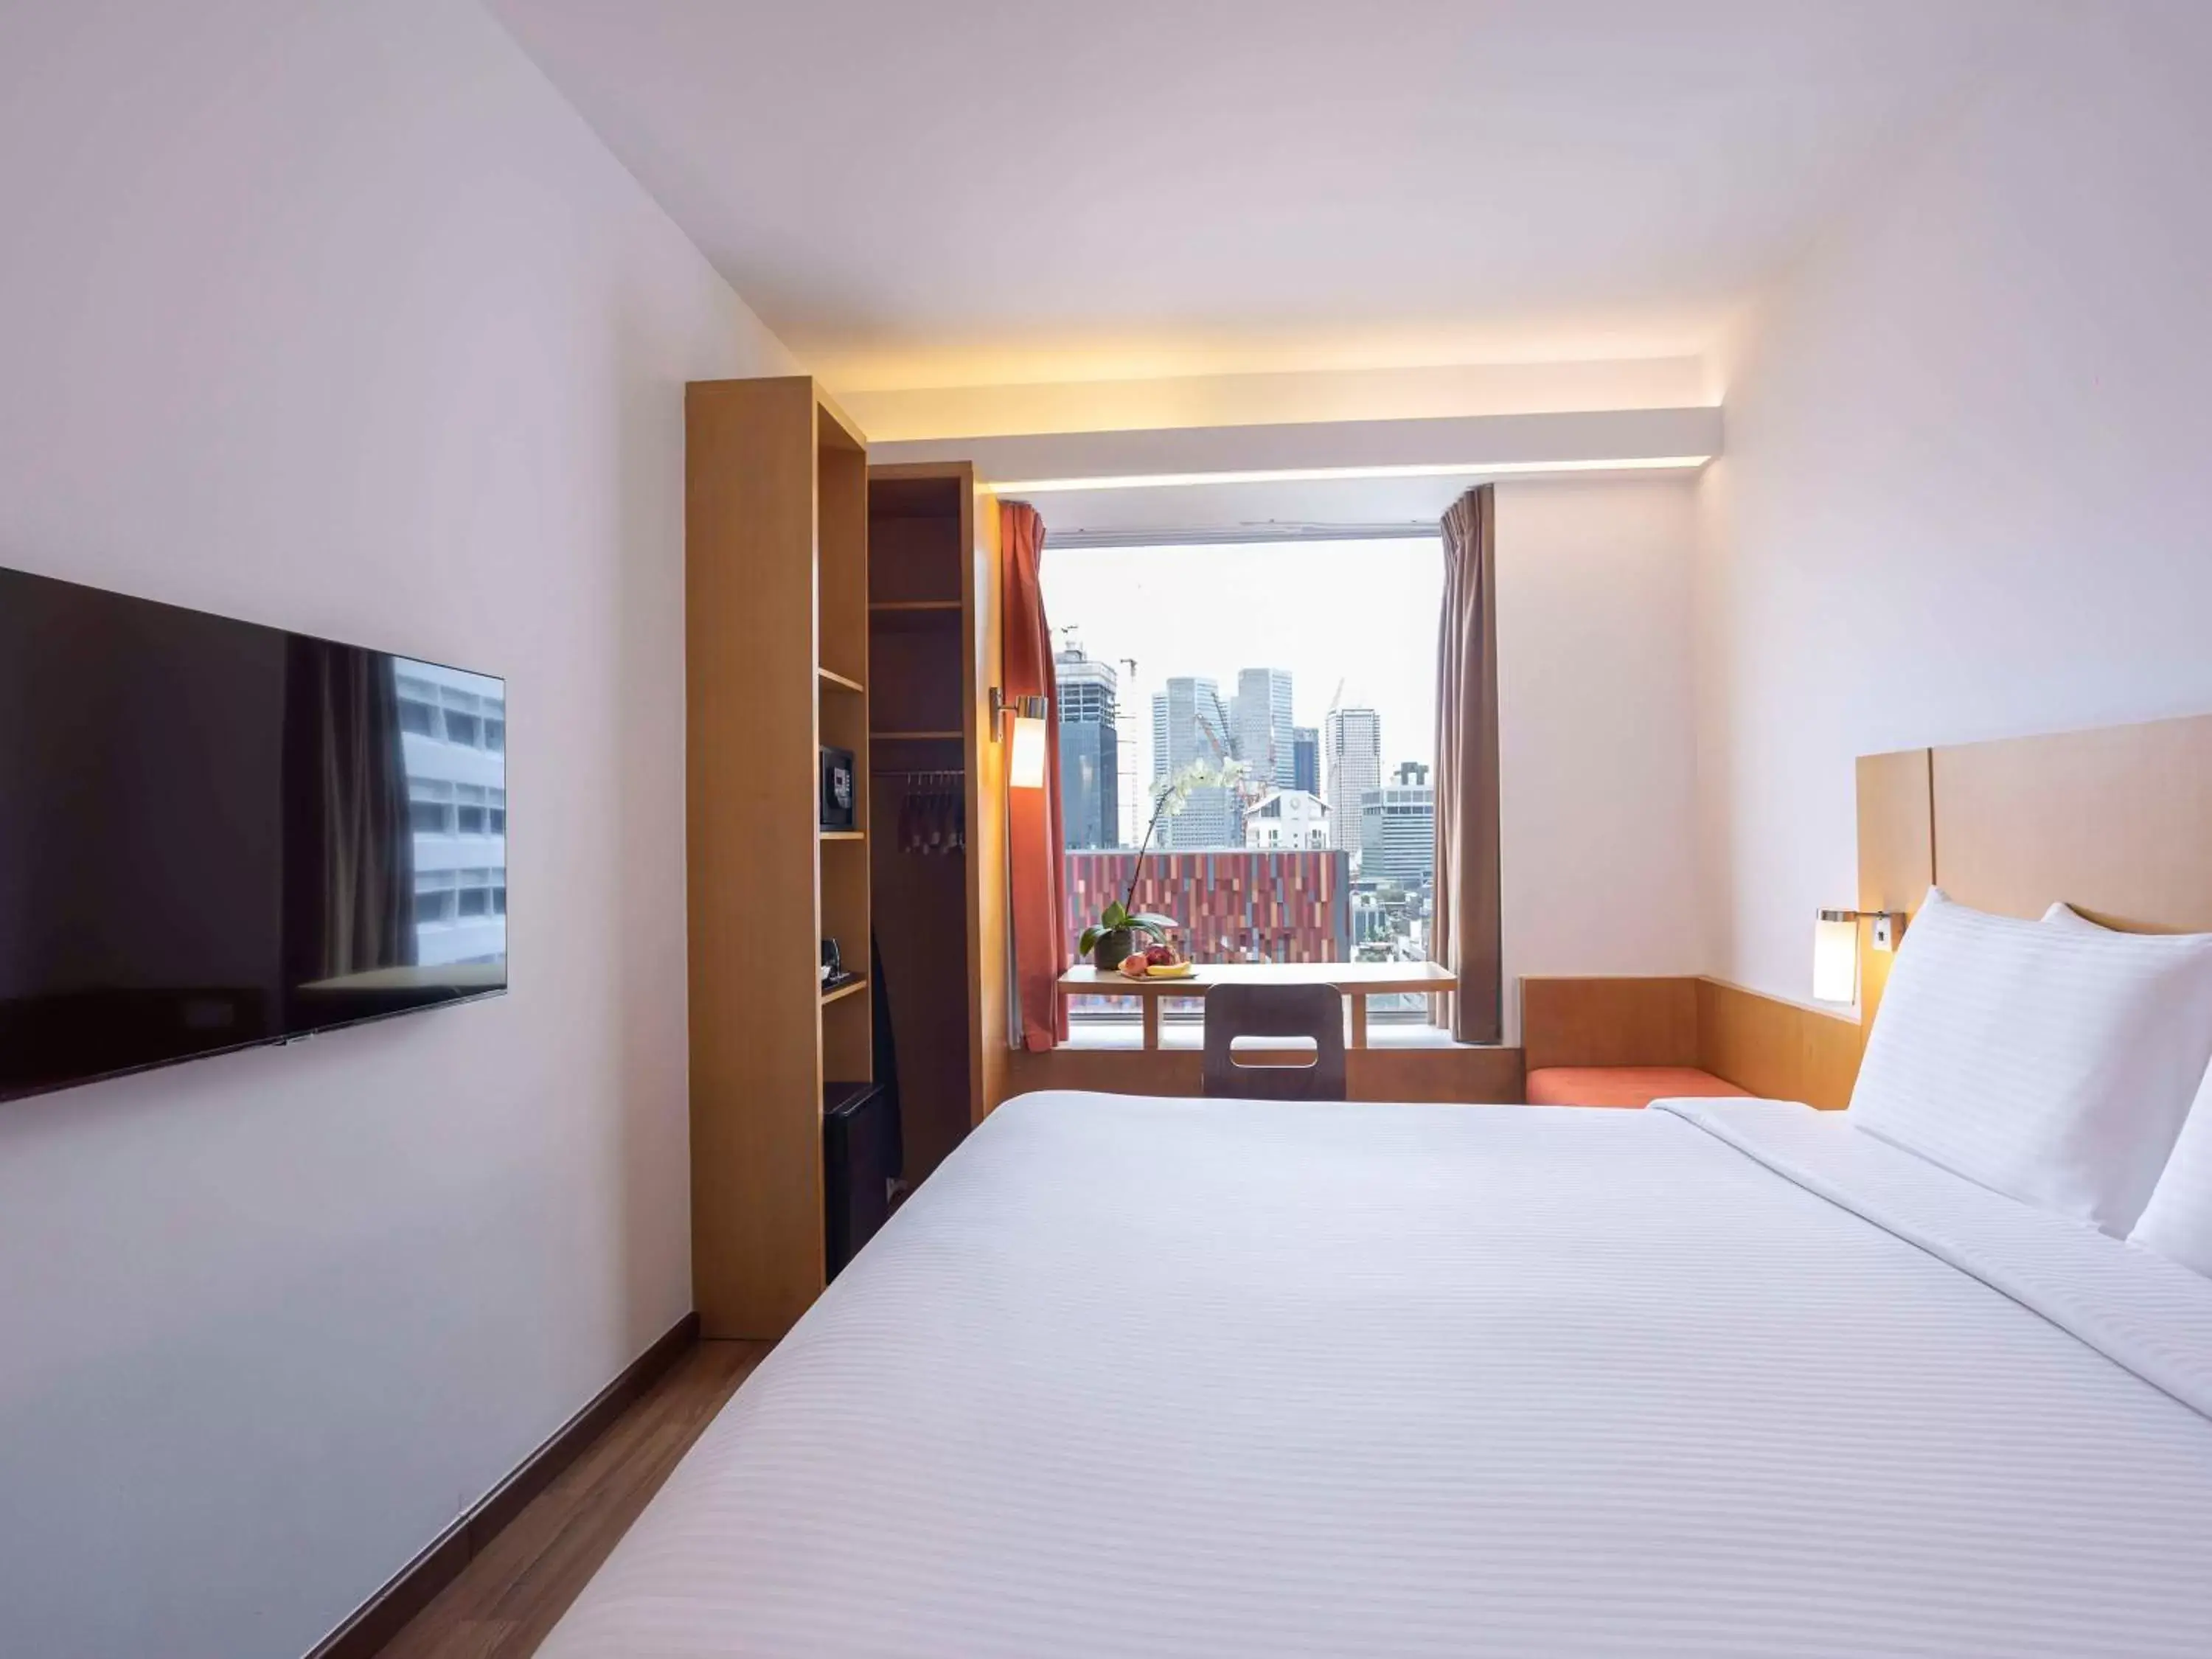 Special Offer - Standard King Room with Extra Benefits  in Ibis Singapore on Bencoolen